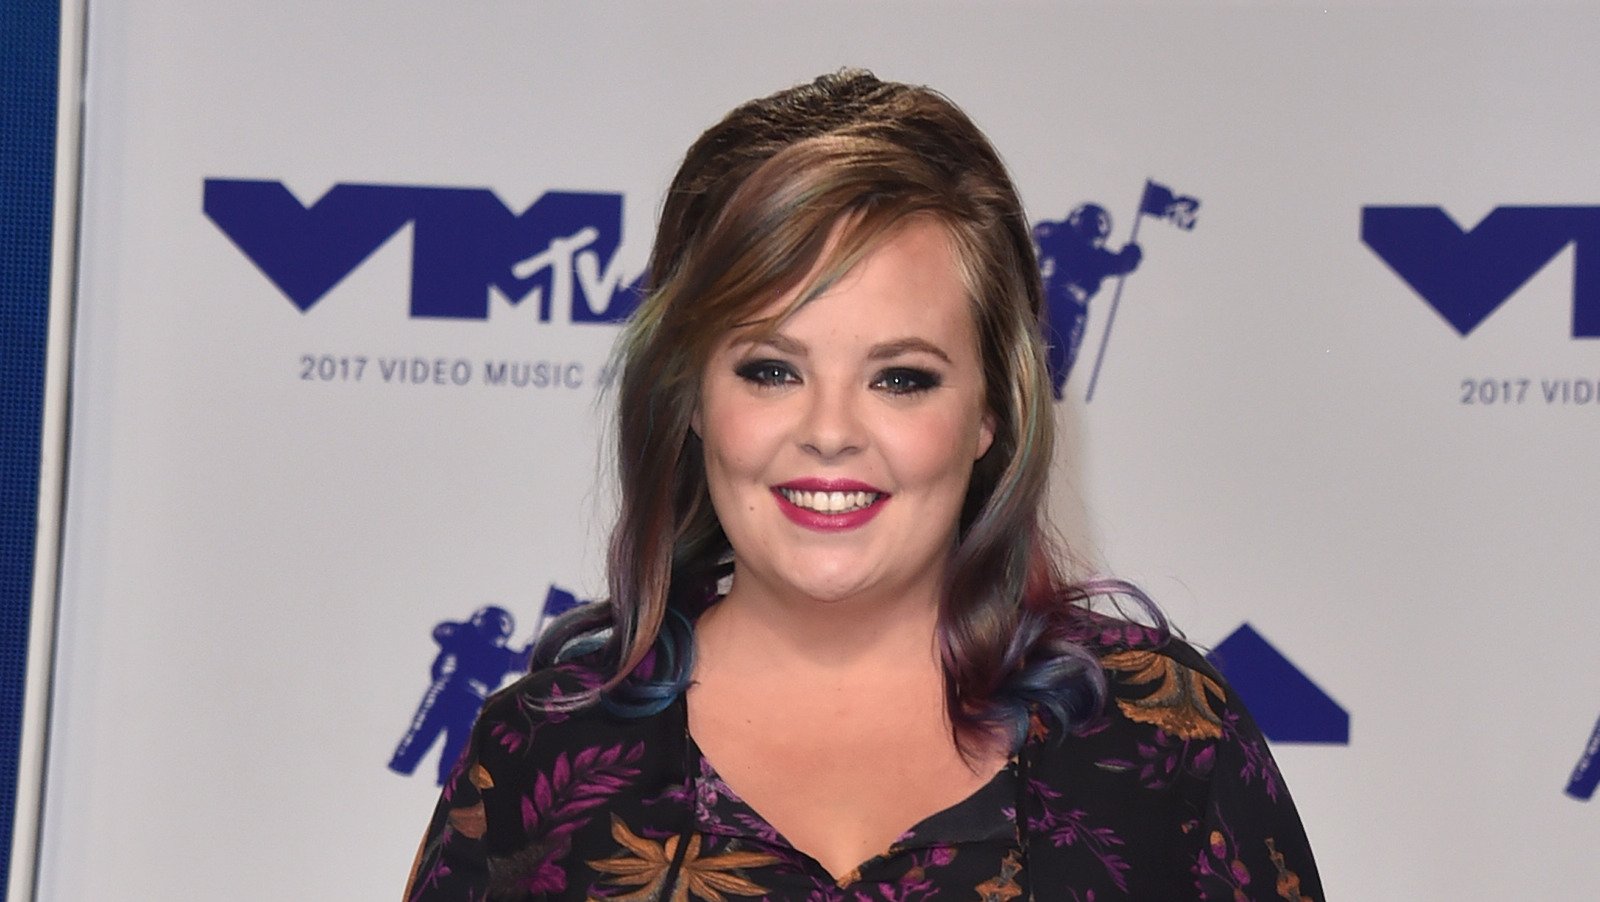 Here's What You Don't Know About Teen Mom OG's Catelynn Lowell